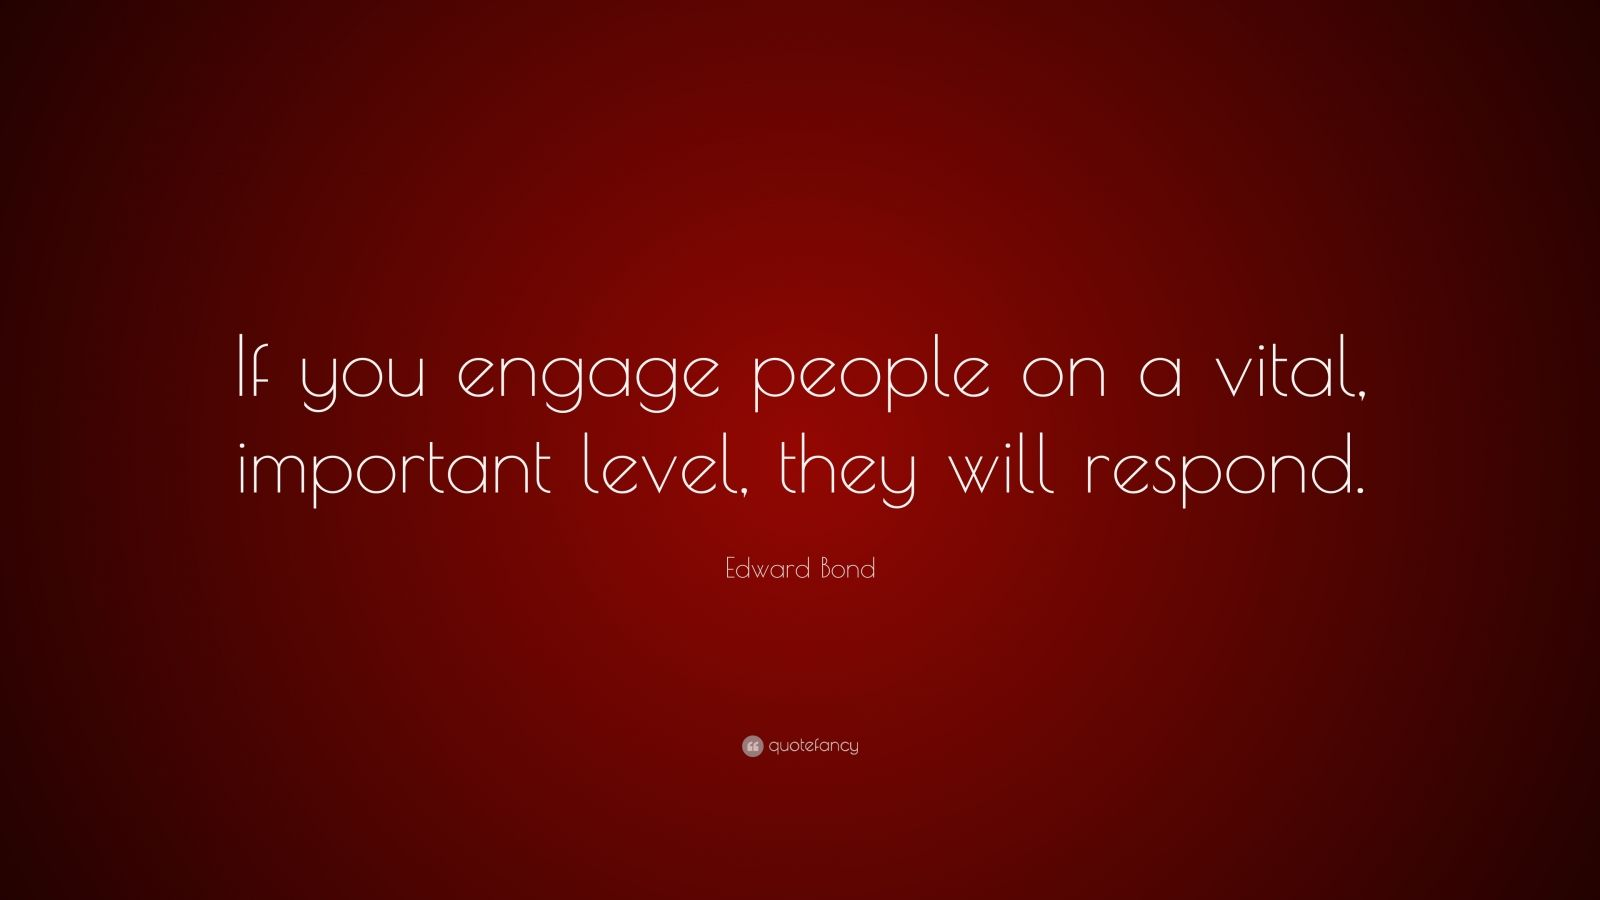 If you engage people on a vital important level, they will respond